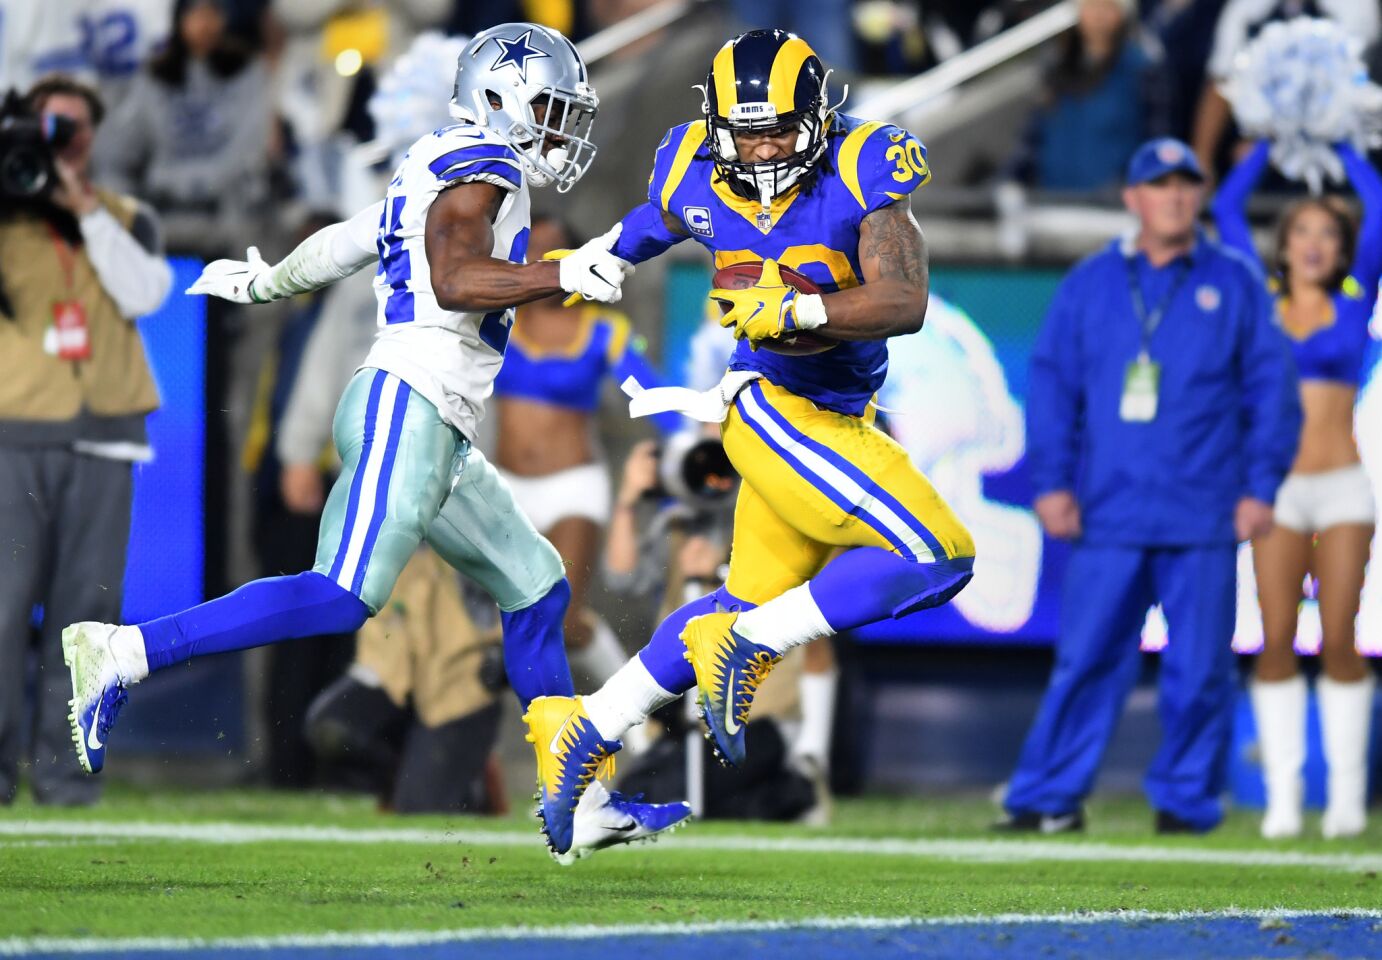 Rams running back Todd Gurley beats Cowboys cornerback Chidobe Awuzie to the goal line on a 35-yard touchdown run during the second quarter.